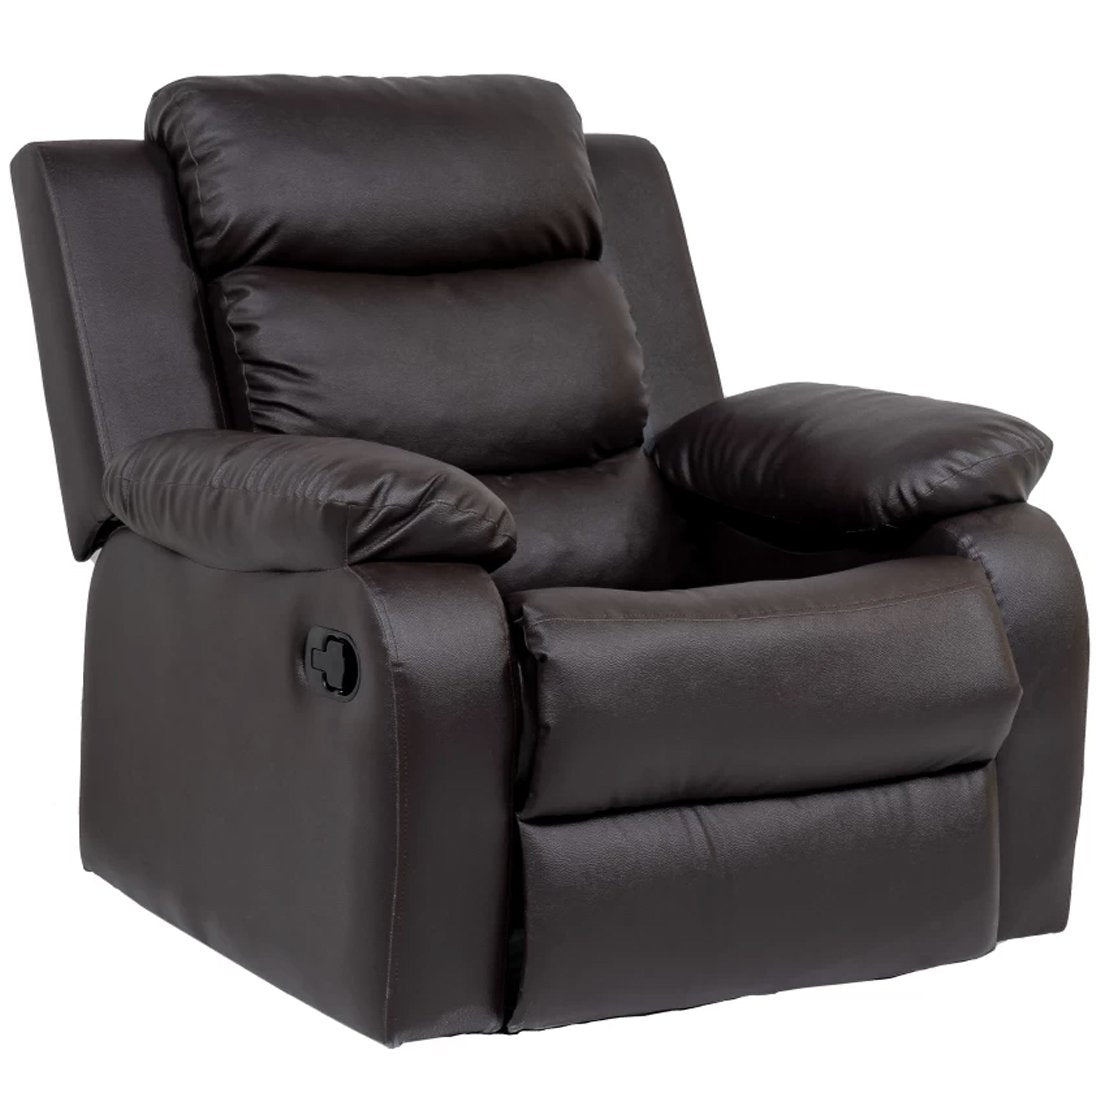 Single Seater 1 Seat Recliner Sofa with Premium Leatherette, Brown